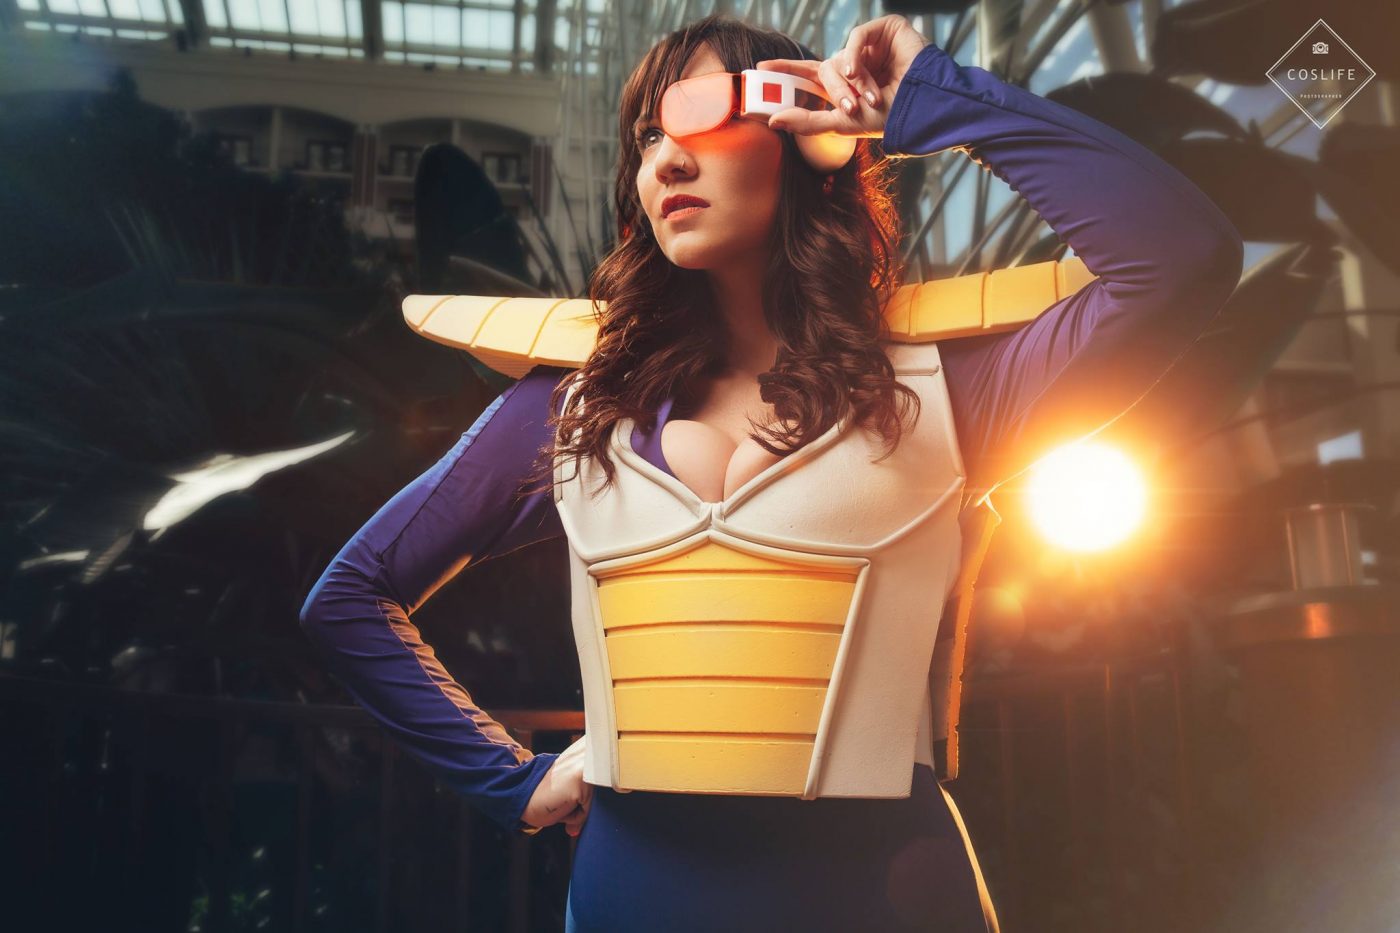 NYCC 2017: Cosplayer and model Erica Fett talks bad horror movies, cosplay and her love of all things Star Wars